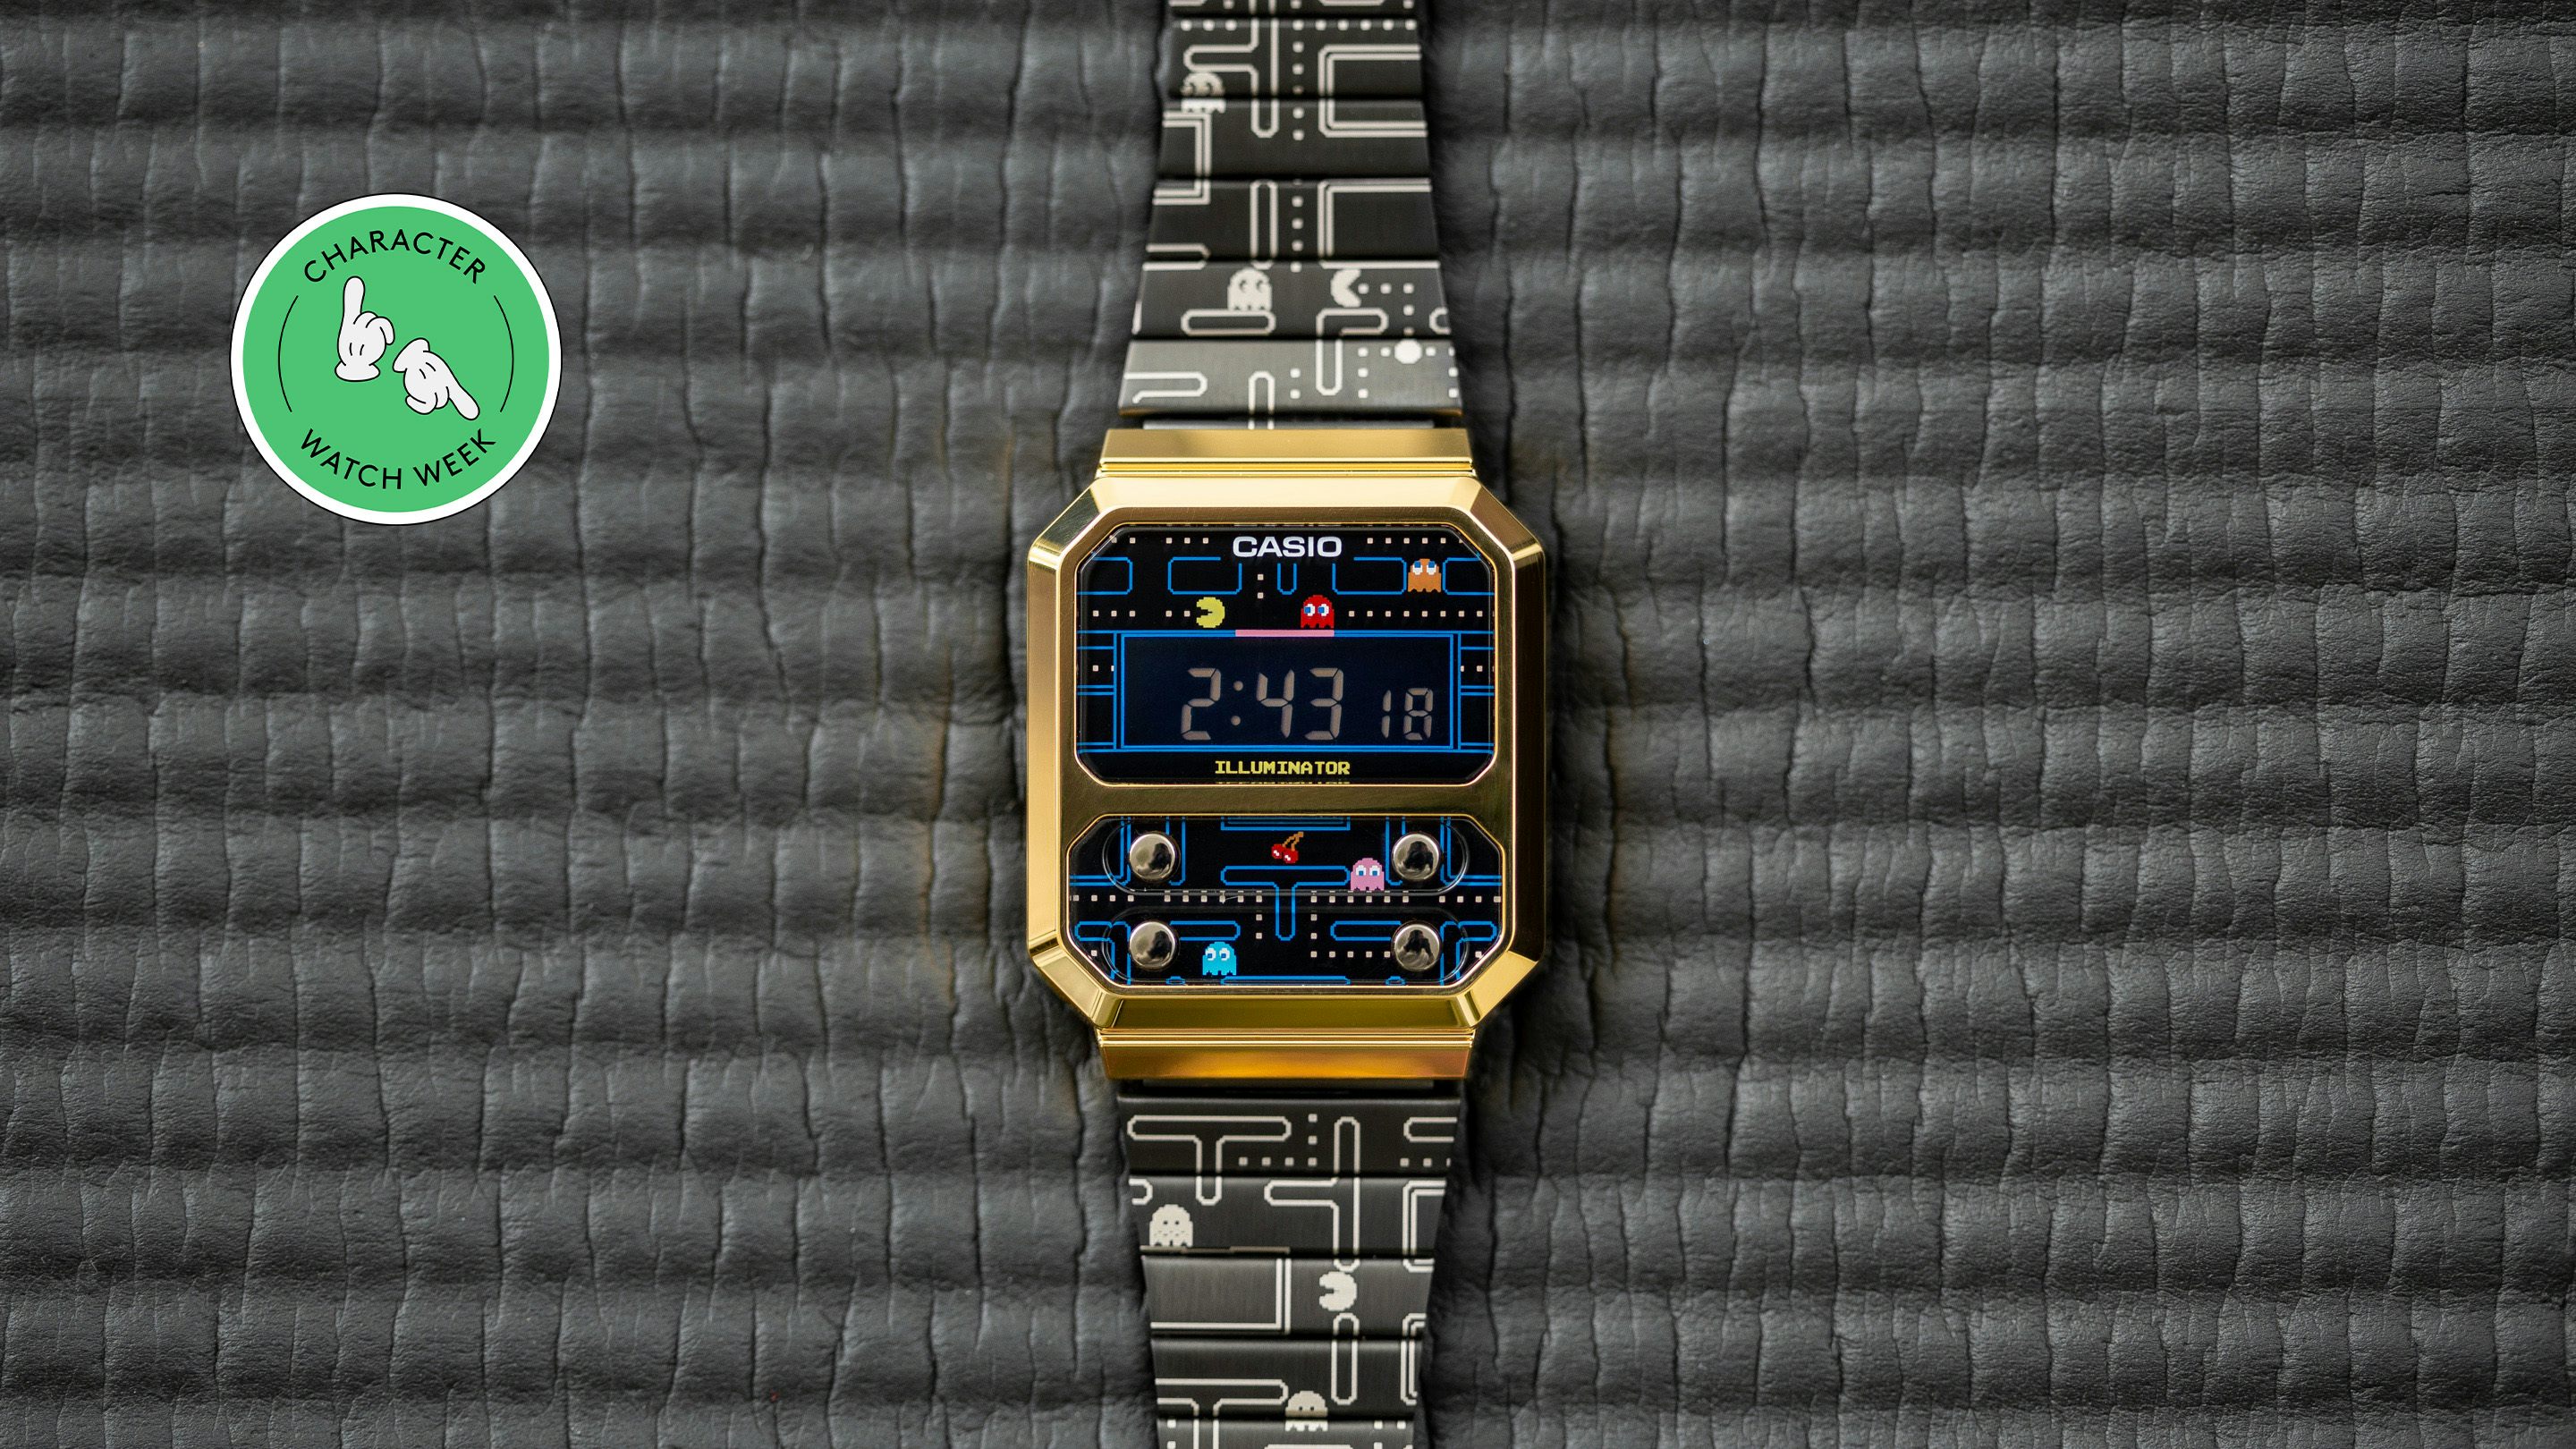 Collectible Casino Watches for sale